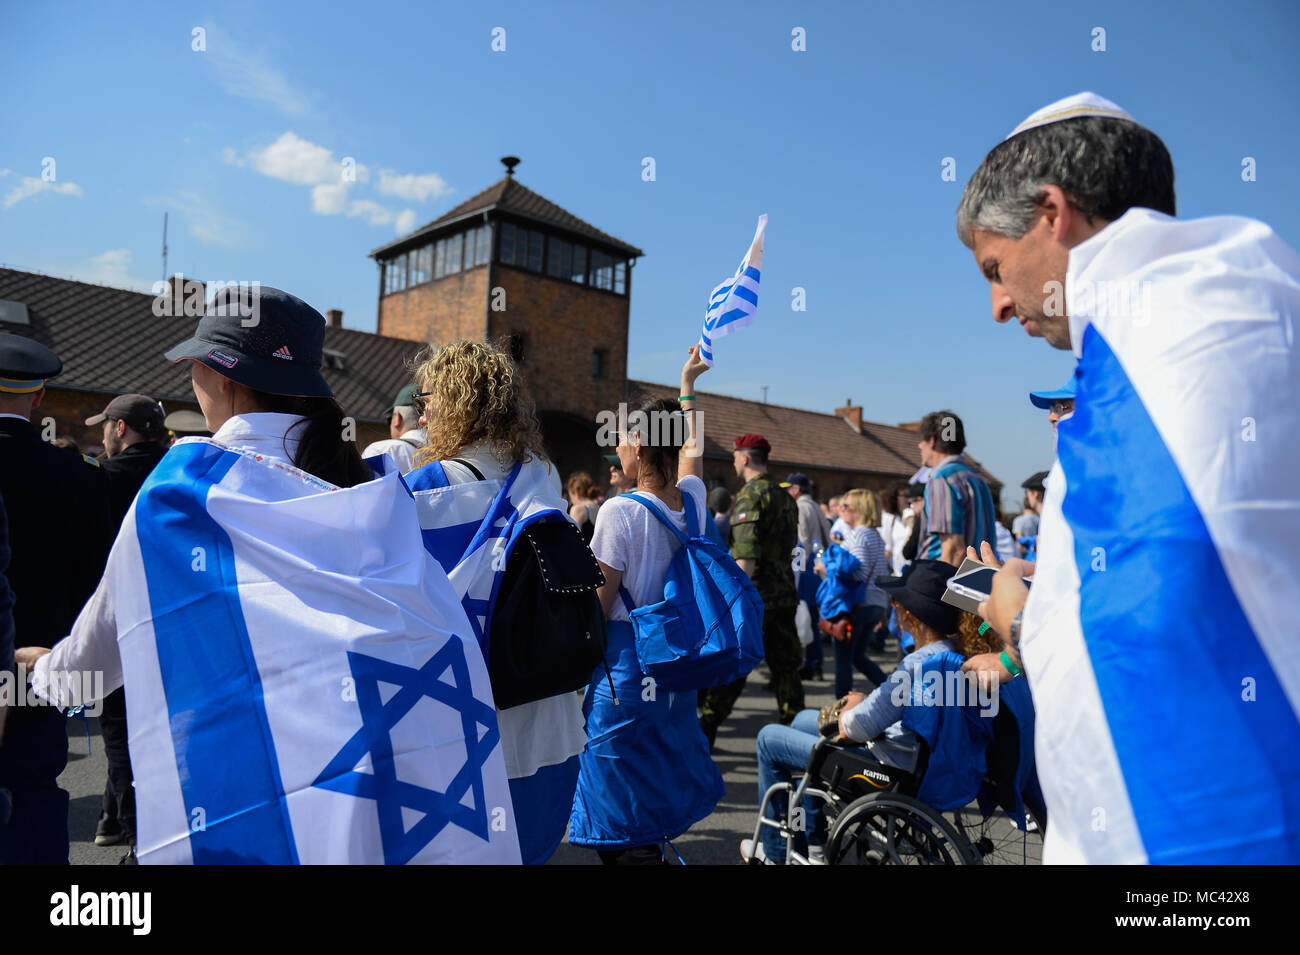 Participants wave Israeli flags at the main gate of the former Nazi German Auschwitz-Birkenau death camp during the 'March of the Living' at Oswiecim. The annual march honours Holocaust victims at the former Nazi German Auschwitz-Birkenau death camp in southern Poland. Stock Photo